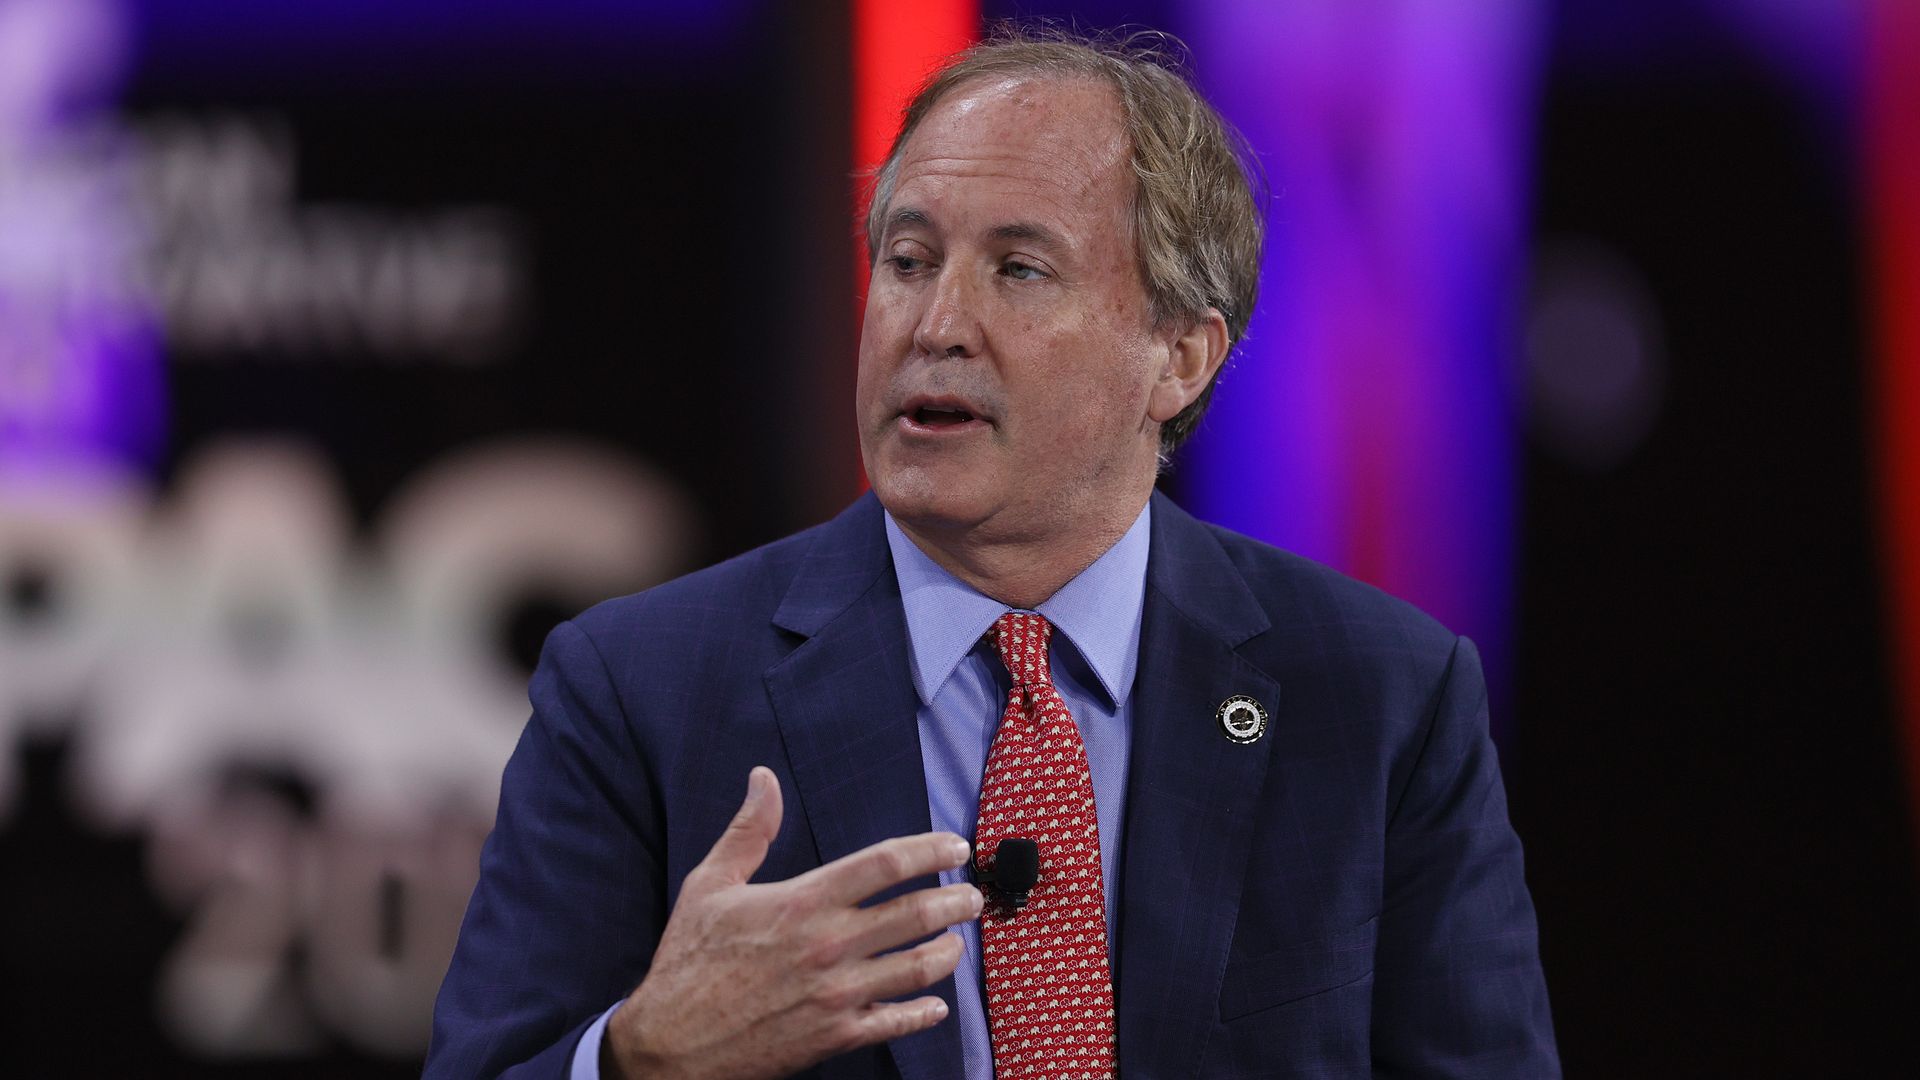 Ken Paxton, Texas Attorney General, during a panel discussion at the Conservative Political Action Conference held in the Hyatt Regency on February 27